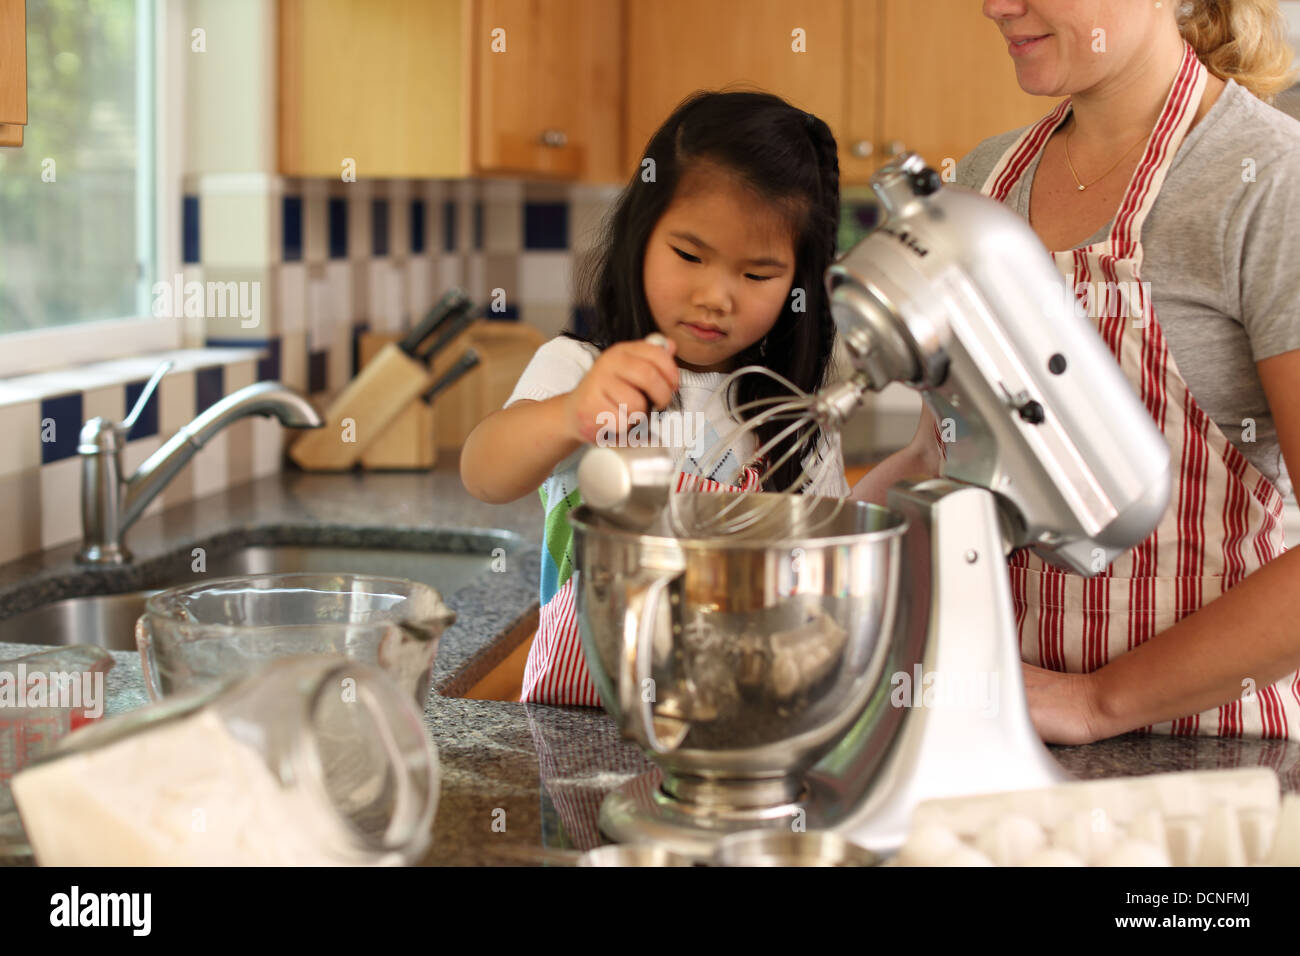 Young girl helping mother bake in kitchen Stock Photo